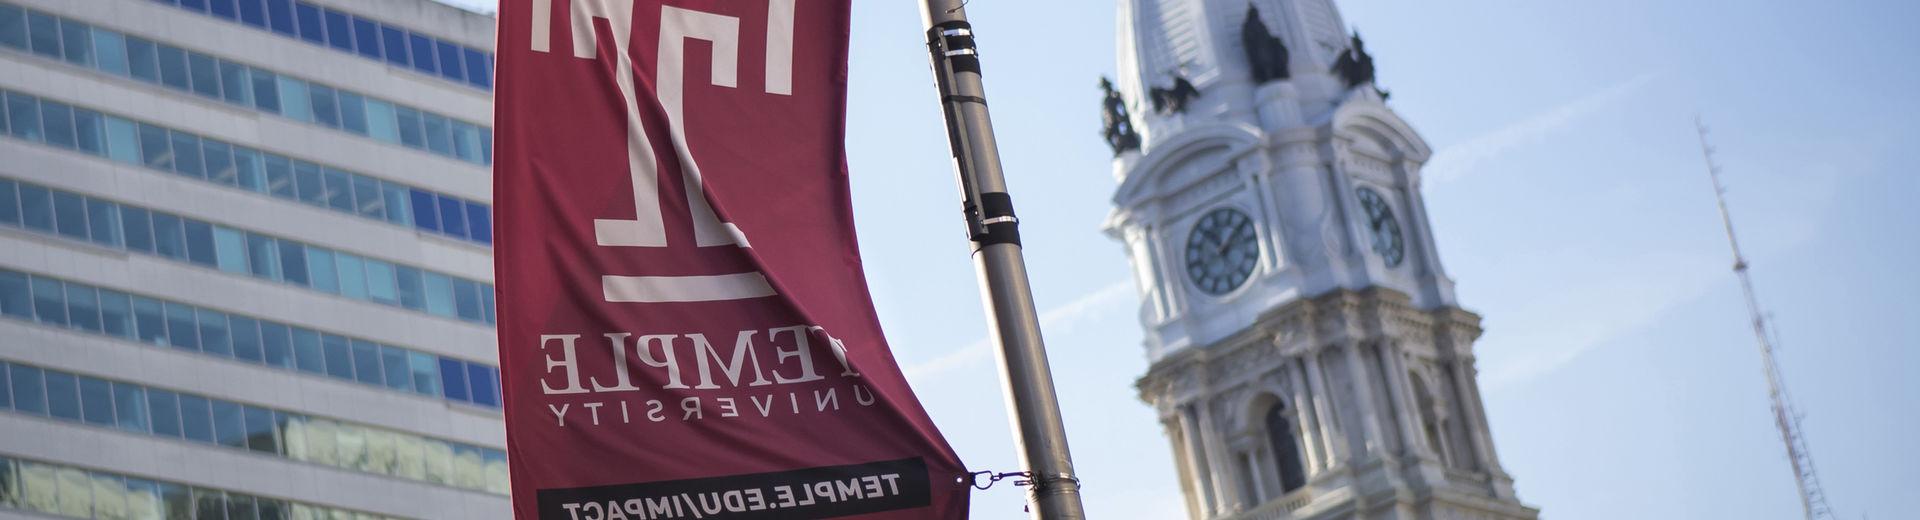 The Temple cherry T flag waves in front of the Philadelphia City Hall building